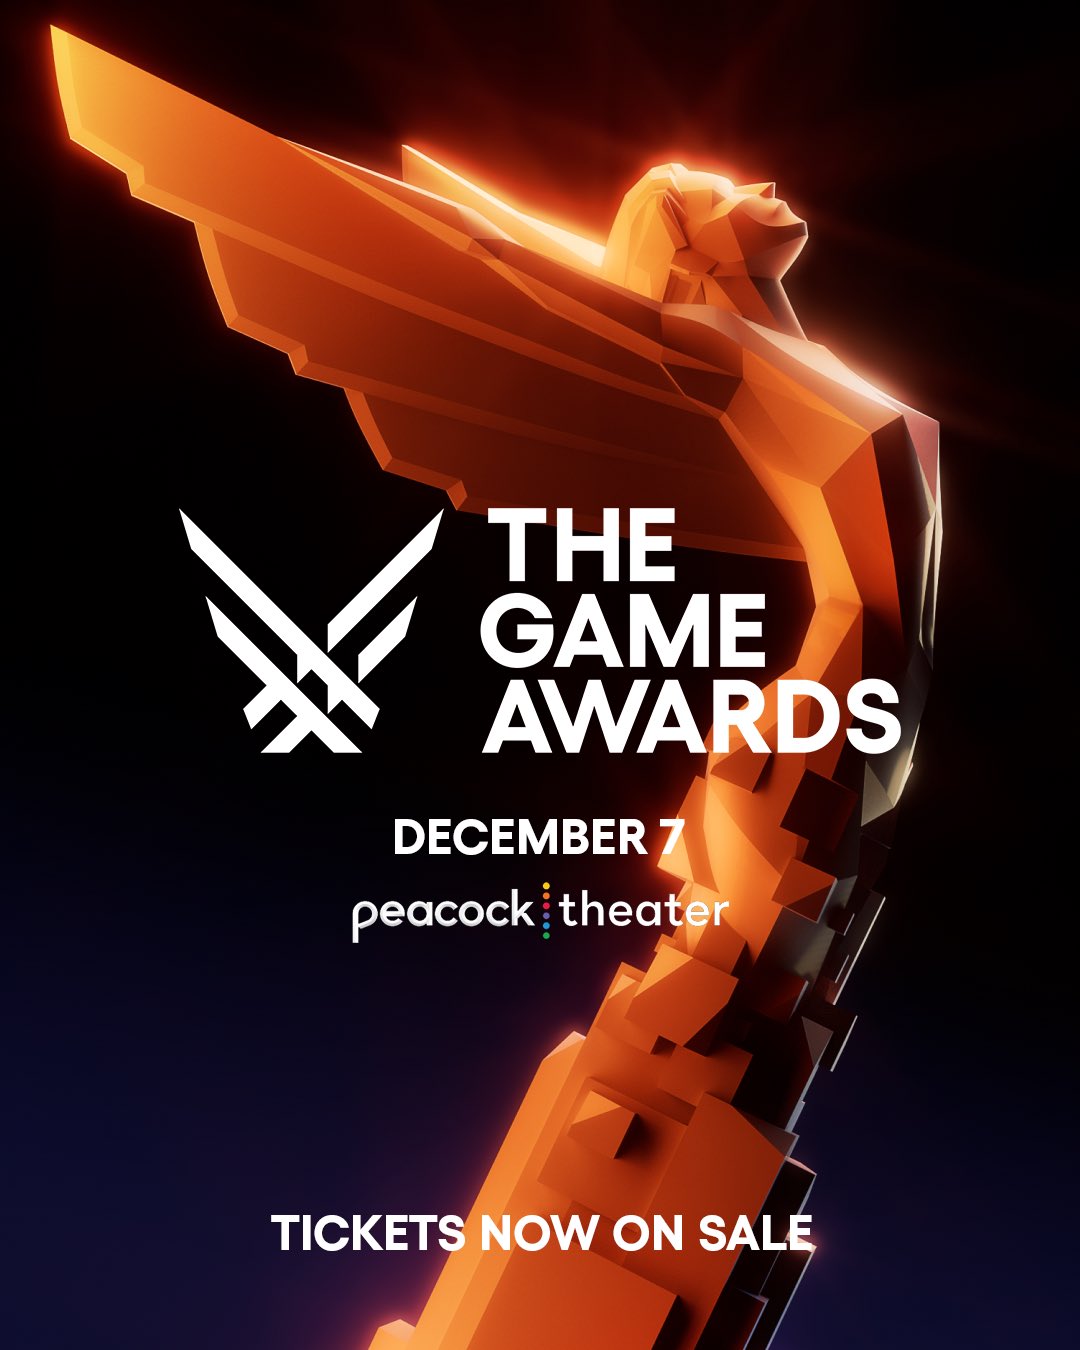 The Game Awards 2021 is Returning Live and In-Person This December